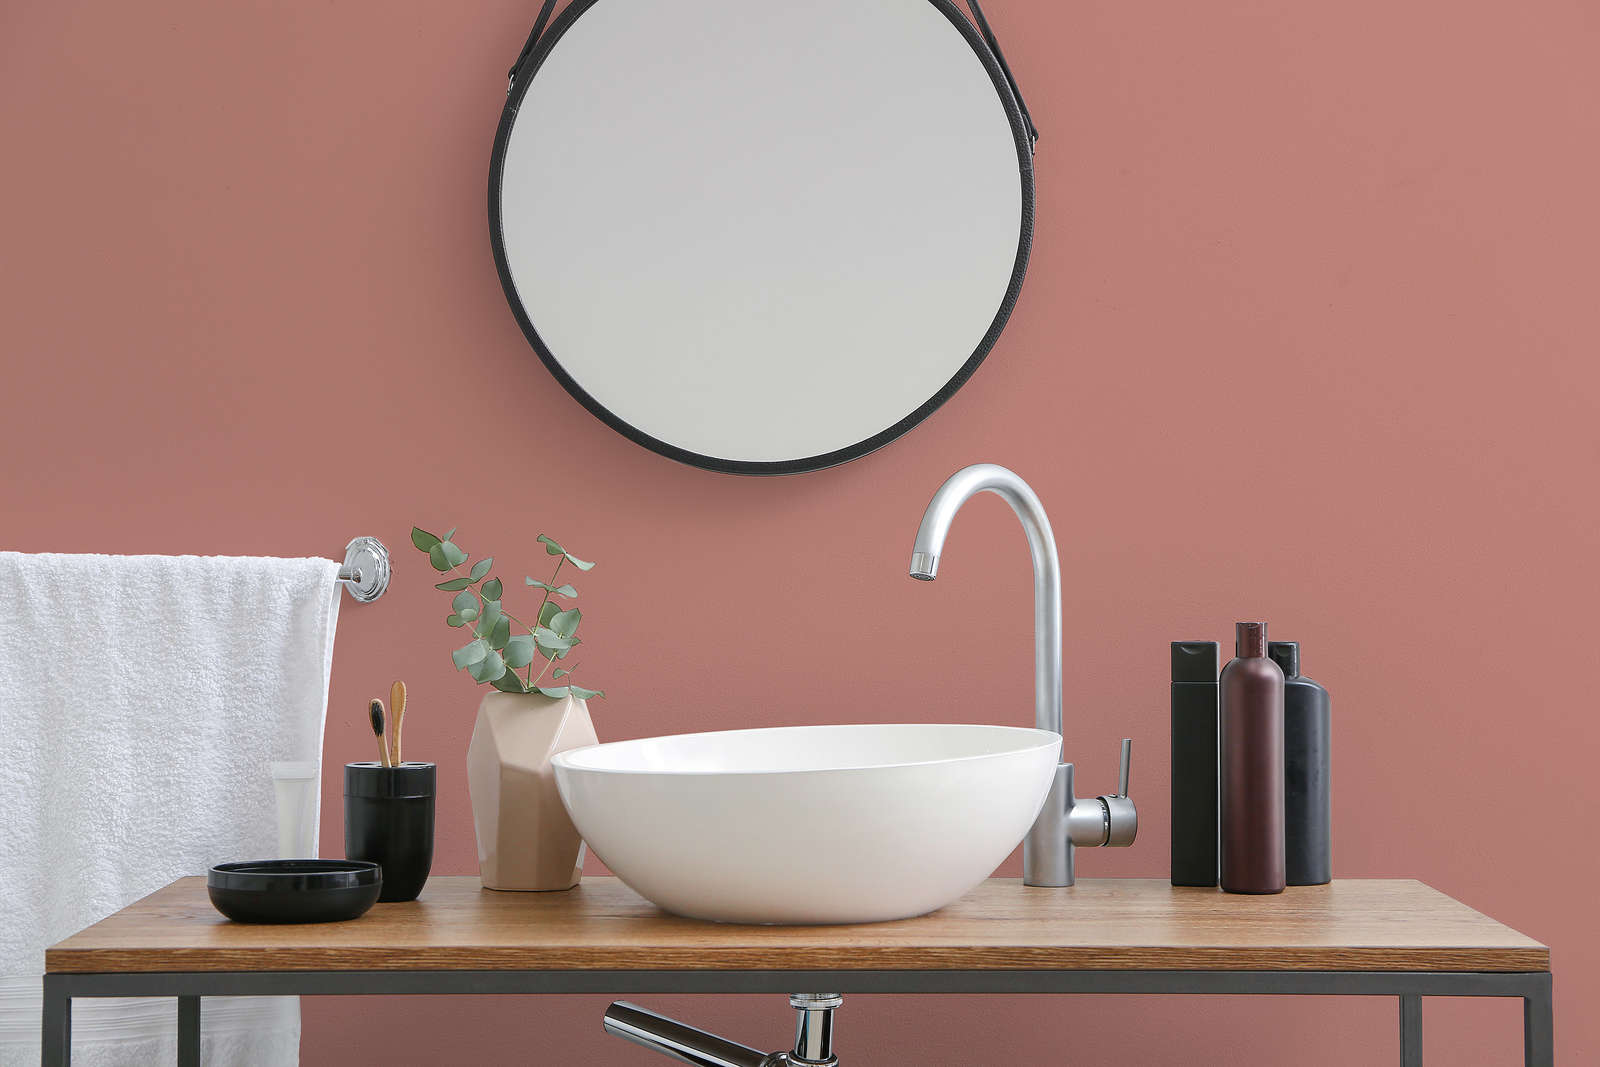             Premium Wall Paint Relaxing Salmon »Luxury Lipstick« NW1004 – 2.5 litre
        